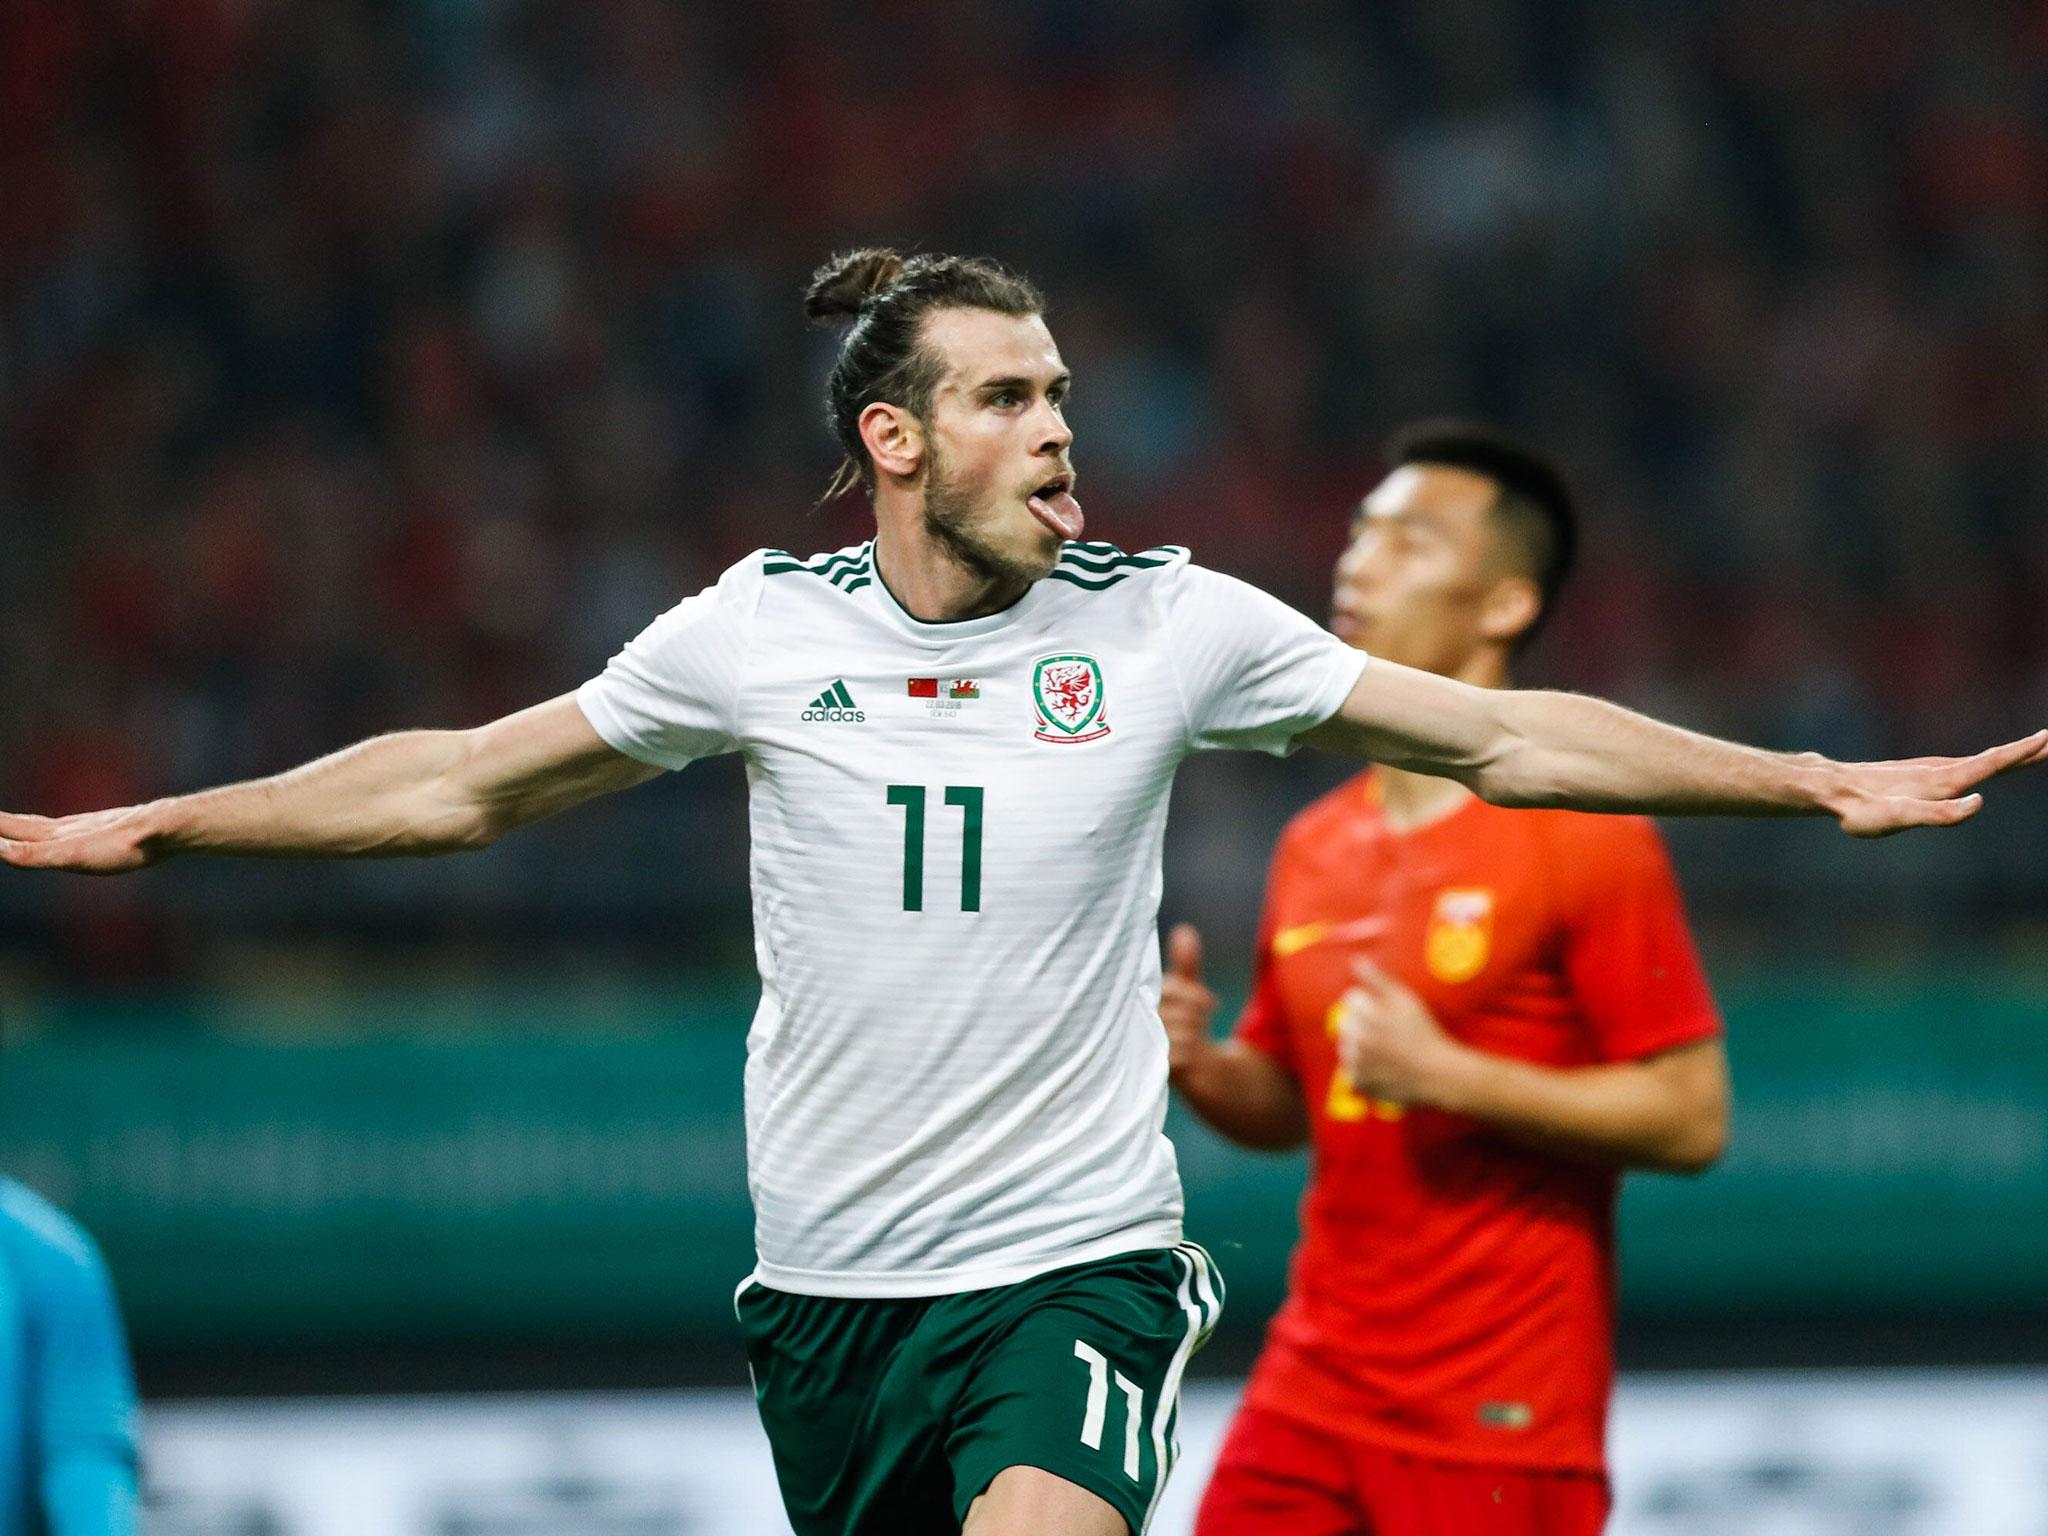 Ryan Giggs urges Gareth Bale to resist any interest from Manchester United and stay put at Real Madrid